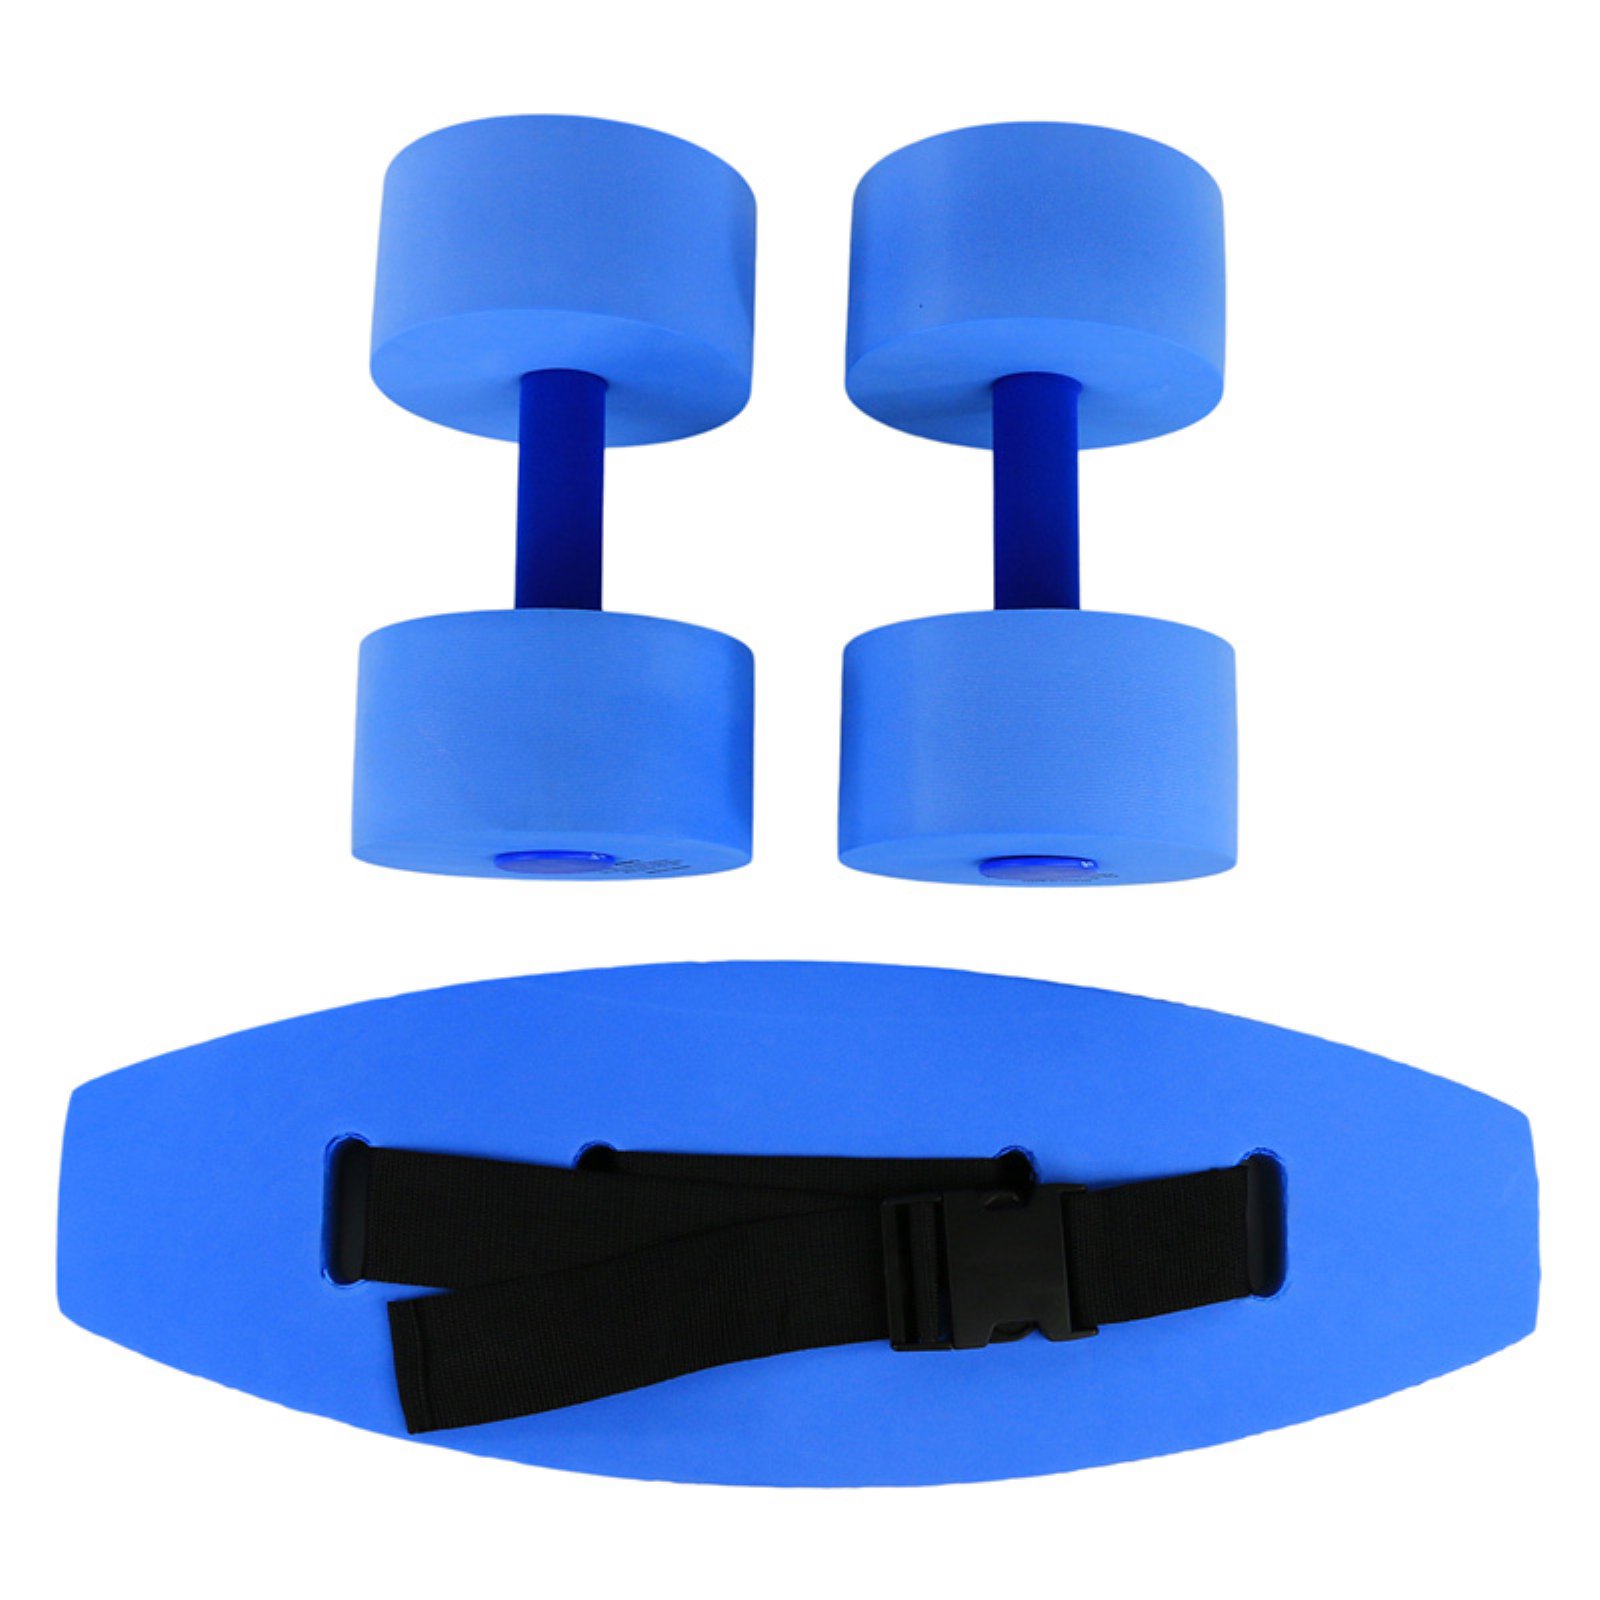 CanDo Standard Water Therapy Aquatic Exercise Kit - image 2 of 2